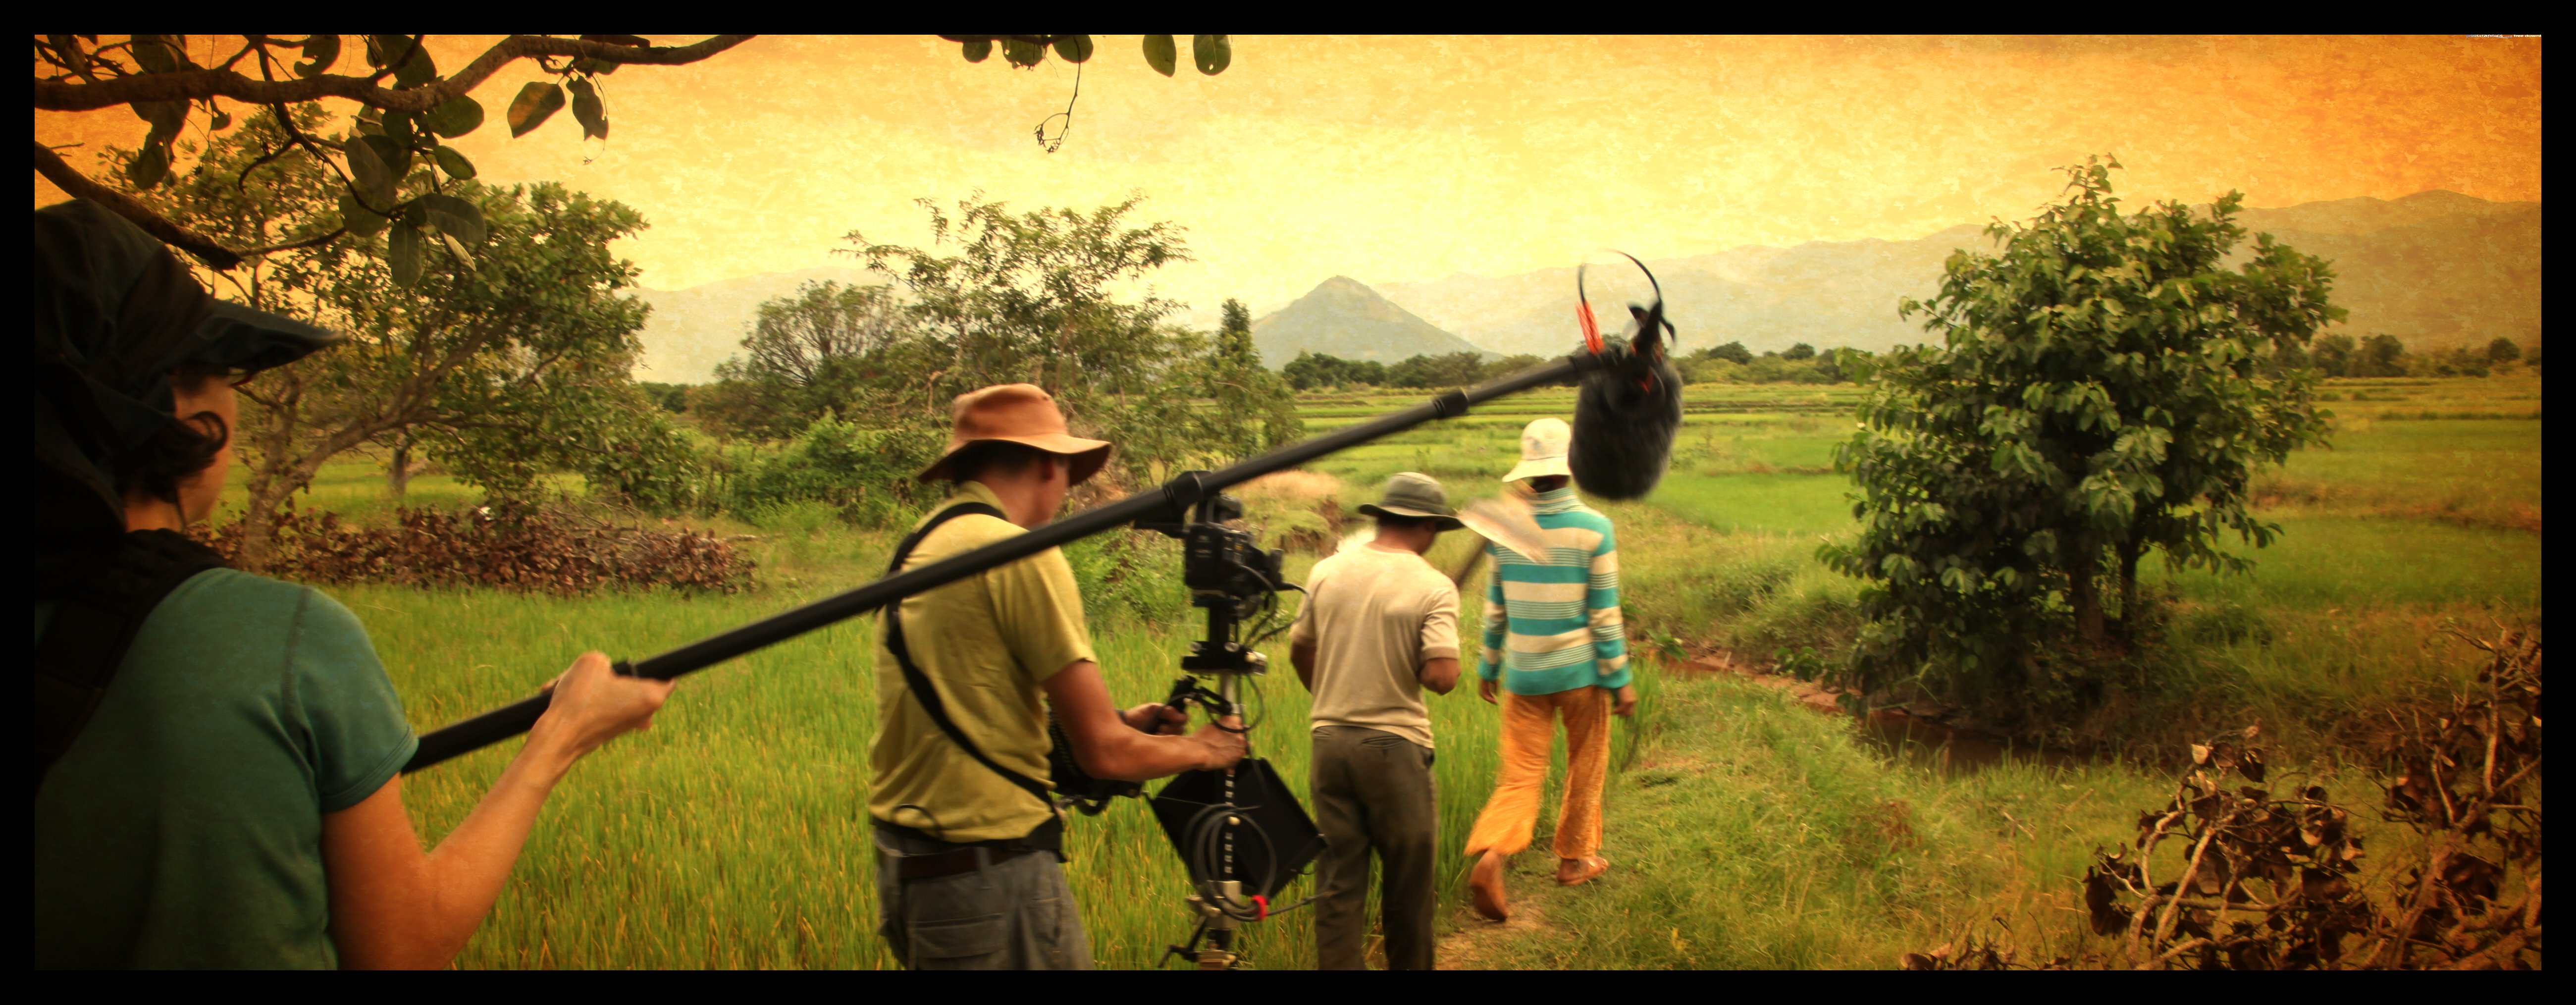 On location in Bac Ai District in south-central Vietnam.